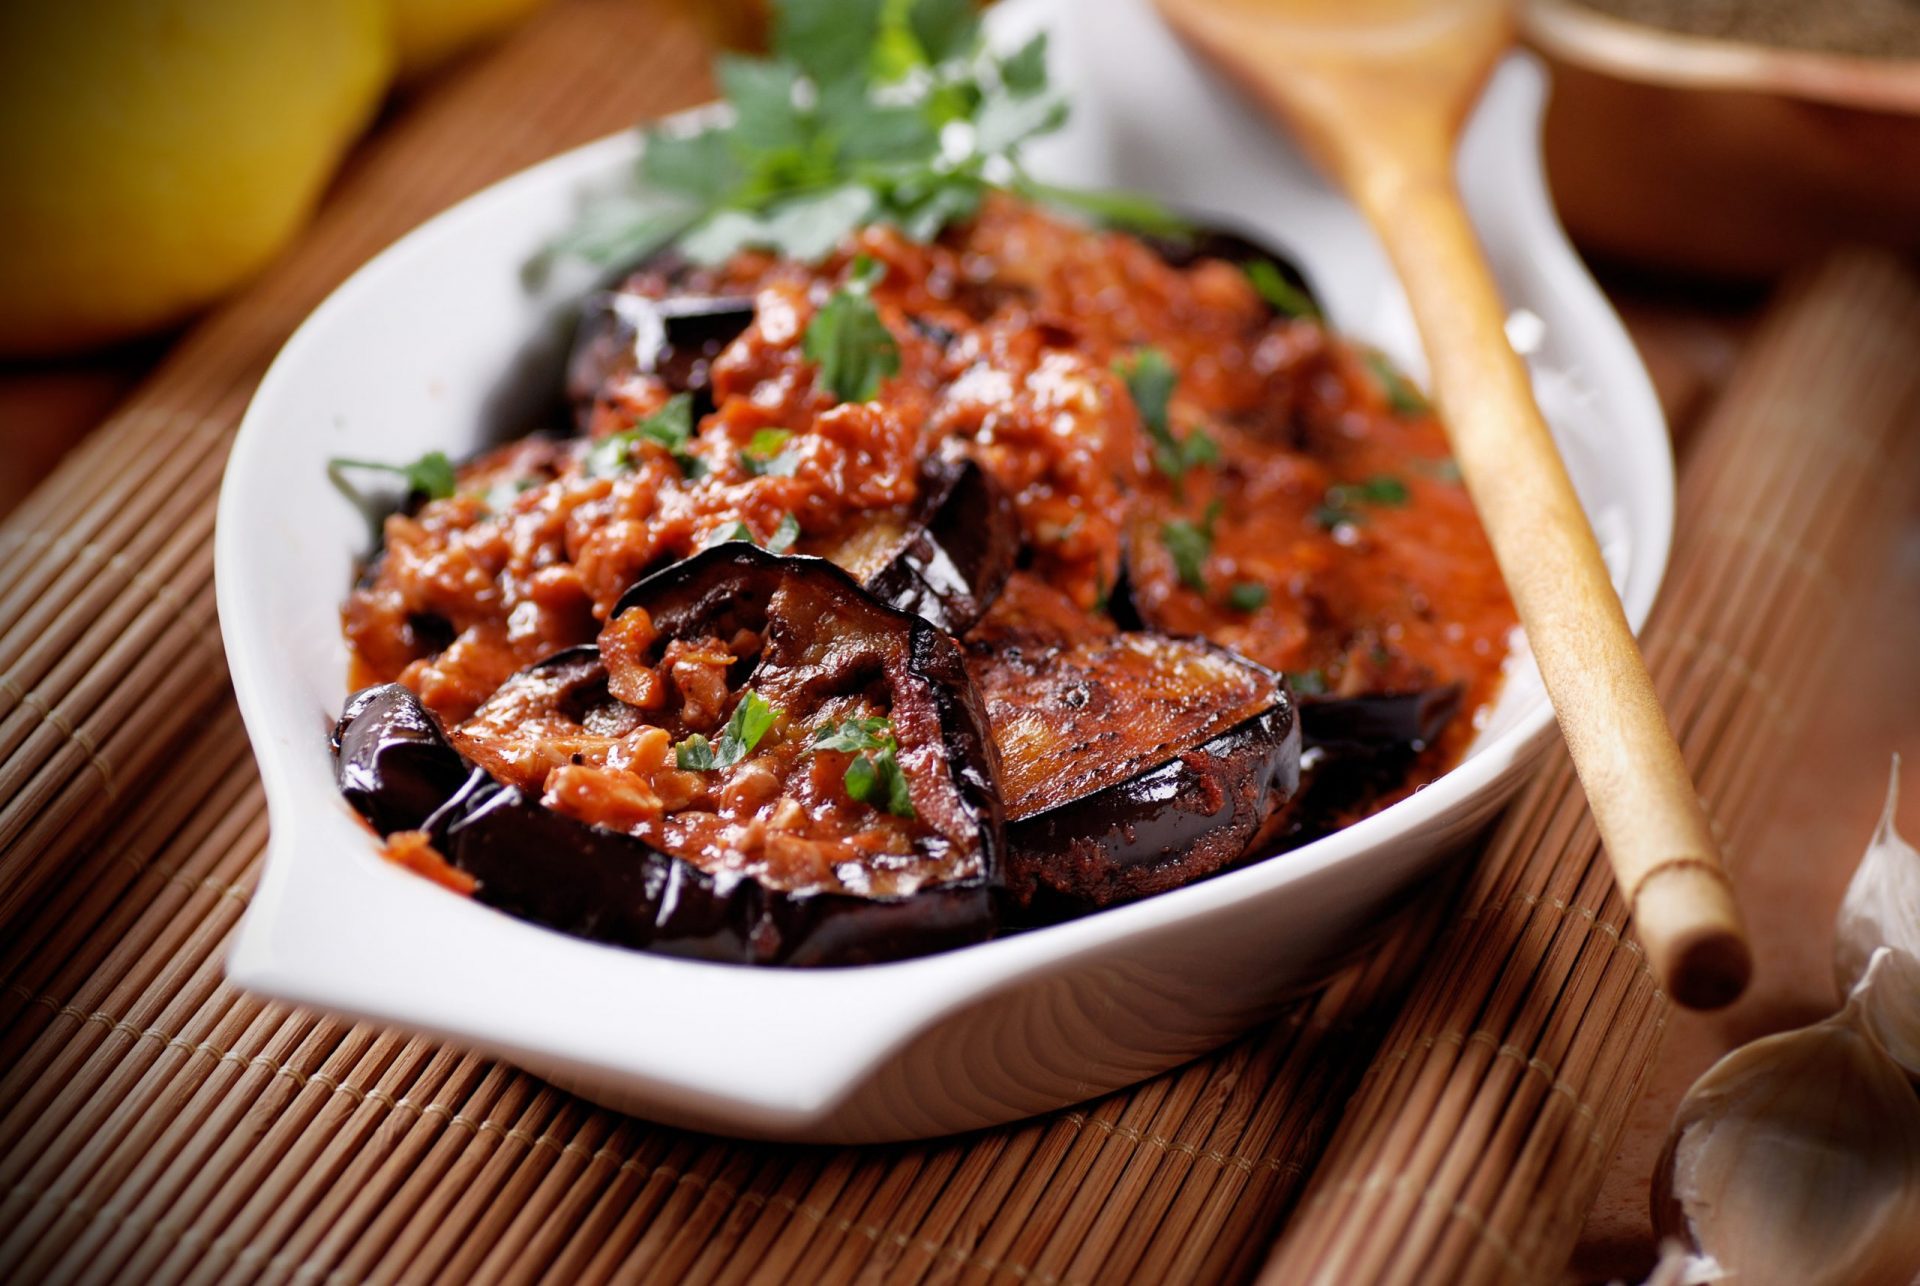 Baked Eggplant with Olives